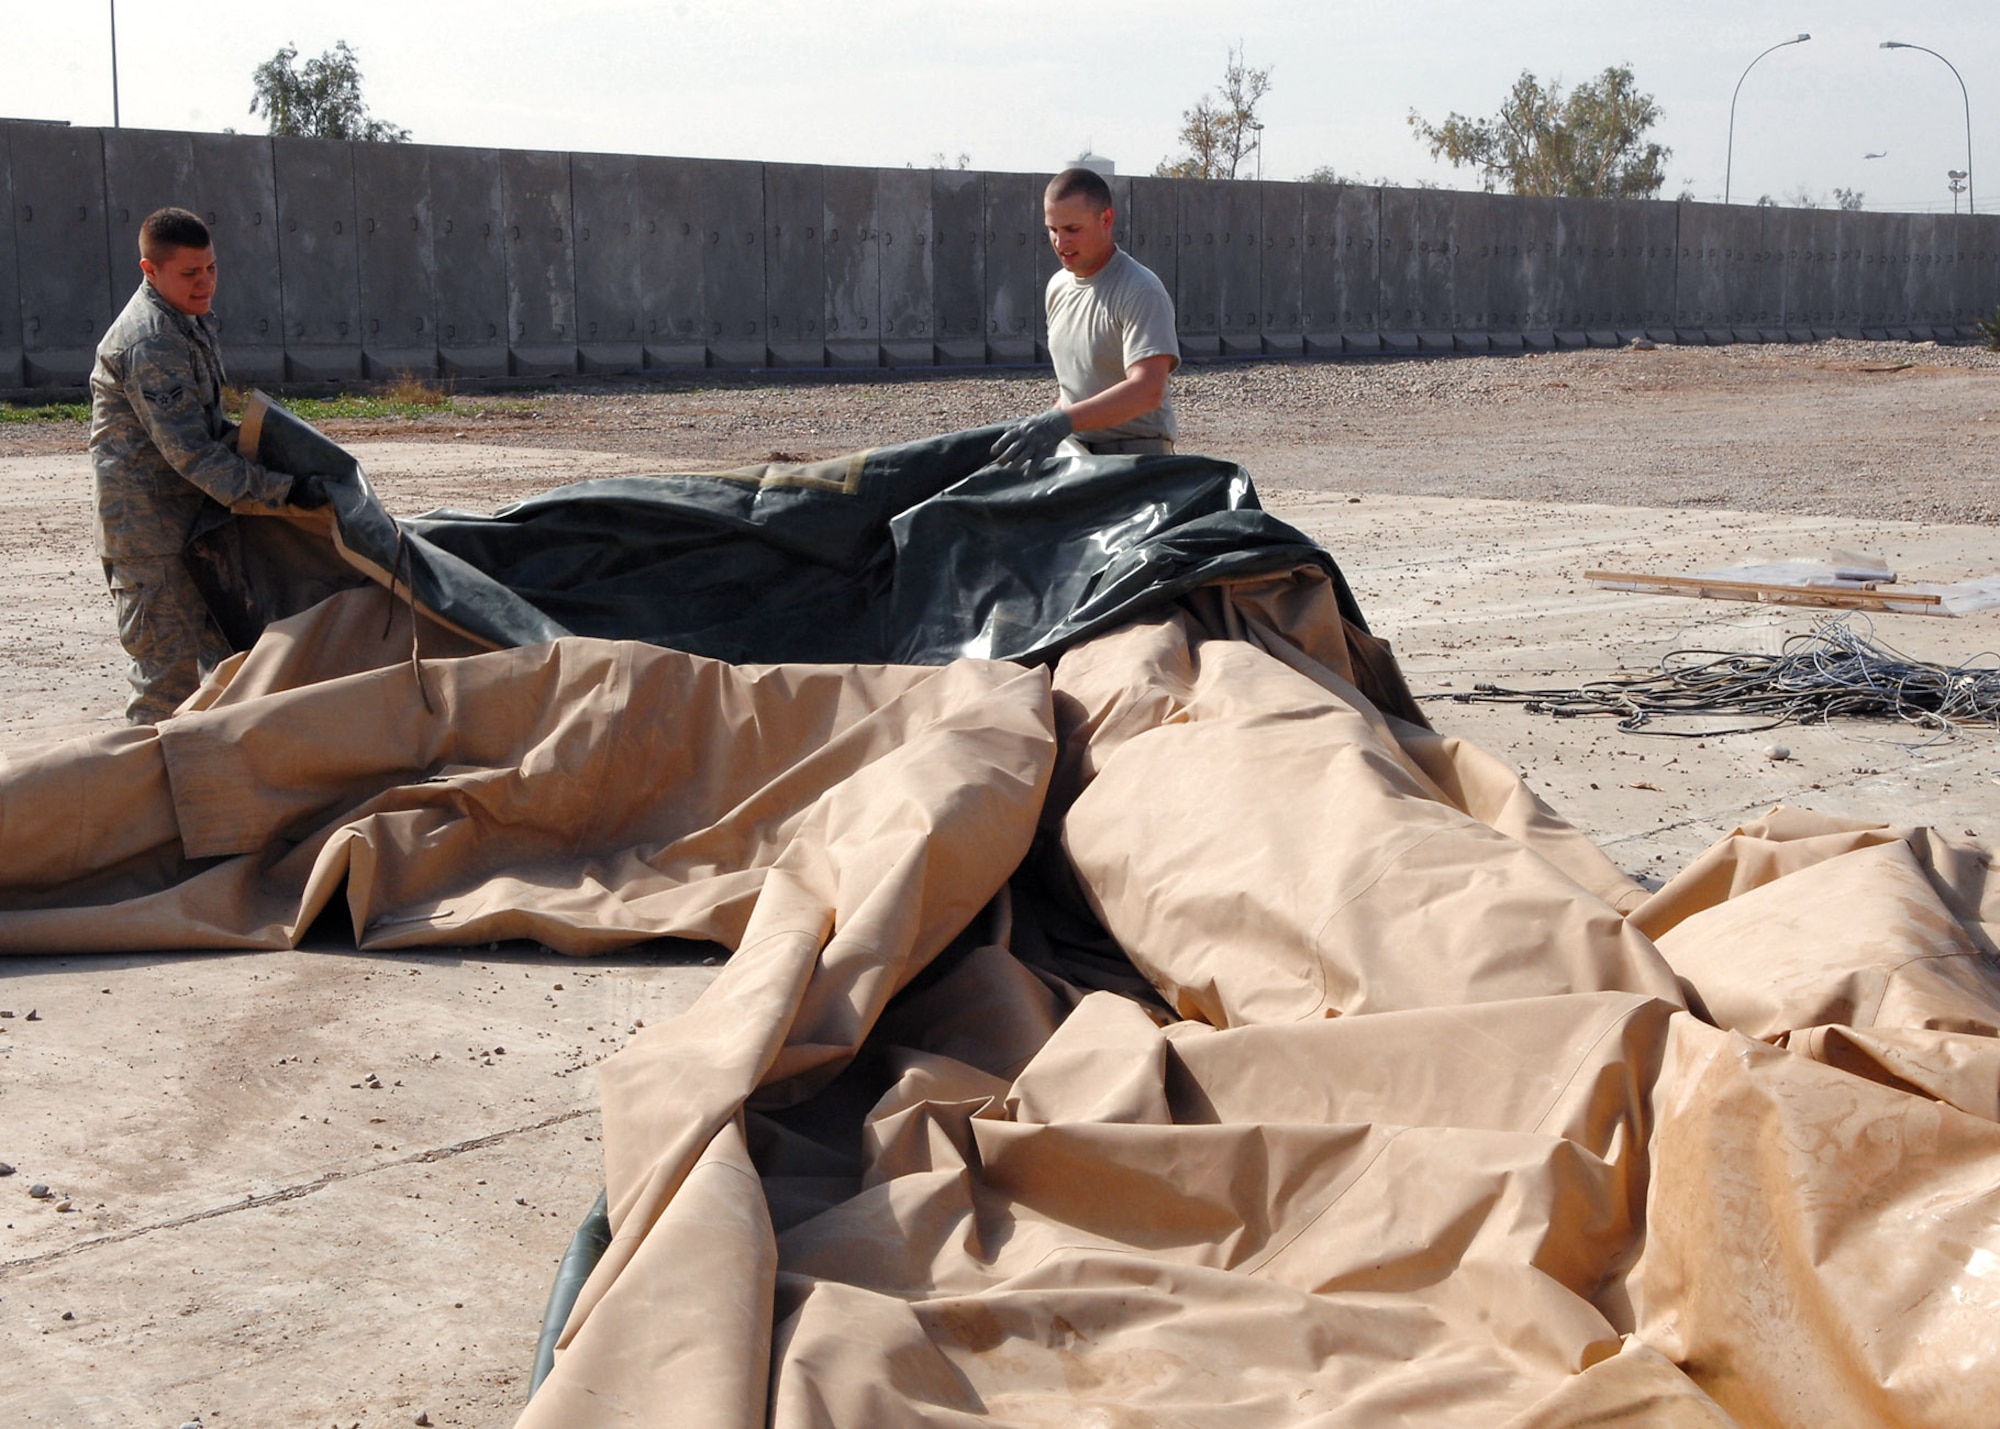 Senior Airmen Lewis Paine and Ivan Alandzak prepare a portion of a tent Feb. 29 for shipment to the National Museum of Health and Medicine in Washington where it is slated for exhibition. The tent was part of the origianal Air Force Theater Hospital at Balad Air Base, Iraq. The medical community considers the tent to be the place where the most American blood was spilled since the Vietnam War. Airman Paine is a 332nd Expeditionary Civil Engineer Squadron power production journeyman deployed from Ellsworth, S.D. and Airman Alandzak is a 332nd ECES liquid fuel journeyman deployed from Malmstrom Air Force Base, Mont. (U.S. Air Force photo/Senior Airman Julianne Showalter) 